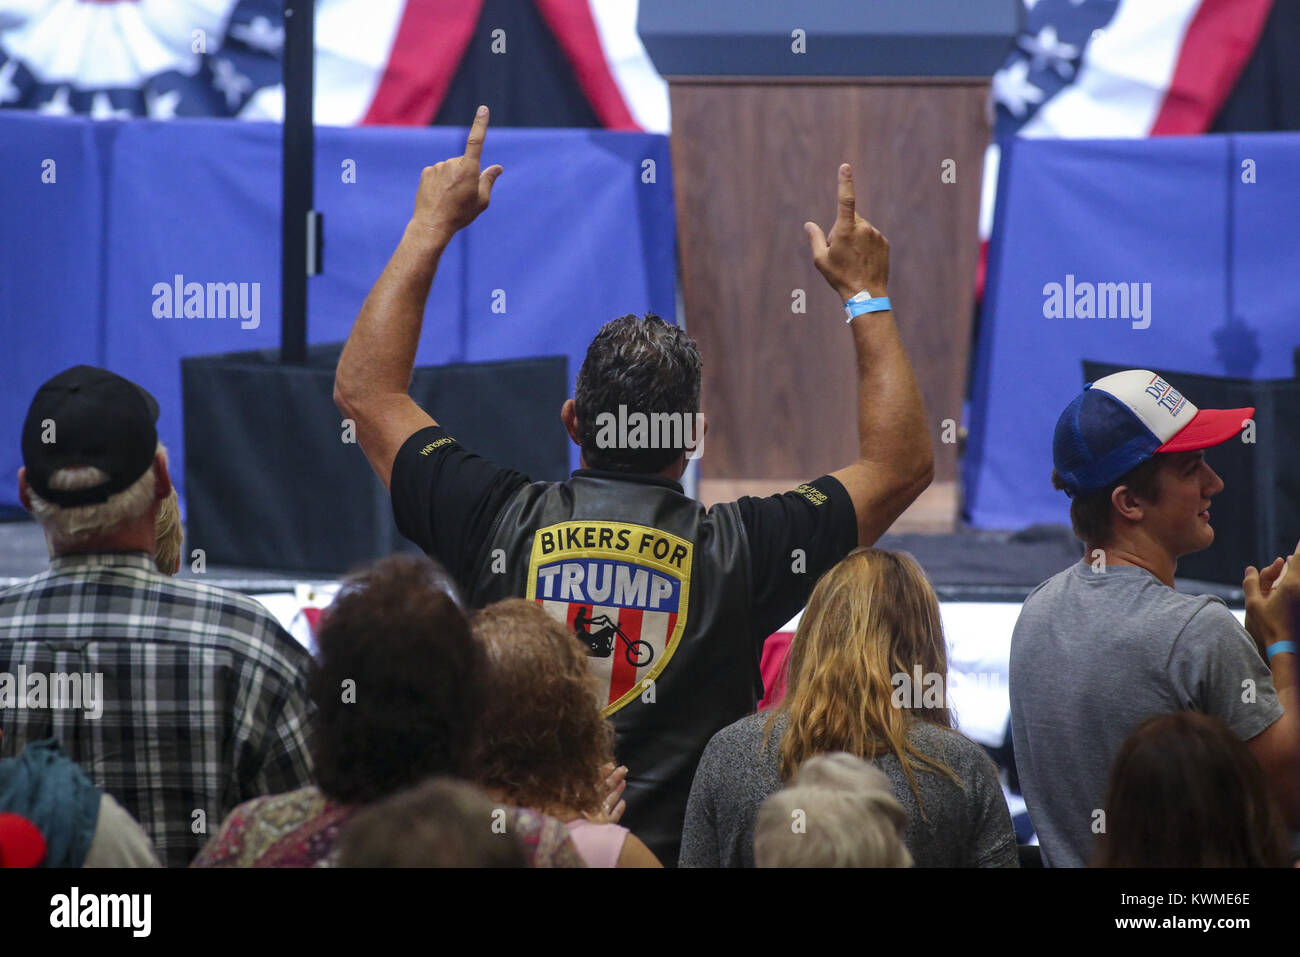 Cedar Rapids, Iowa, USA. 21st June, 2017. A Bikers For Trump rider raises his hands to cheer for the President at a campaign rally at the U.S. Cellular Center in Cedar Rapids on Wednesday, June 21, 2017. Credit: Andy Abeyta, Quad-City Times/Quad-City Times/ZUMA Wire/Alamy Live News Stock Photo